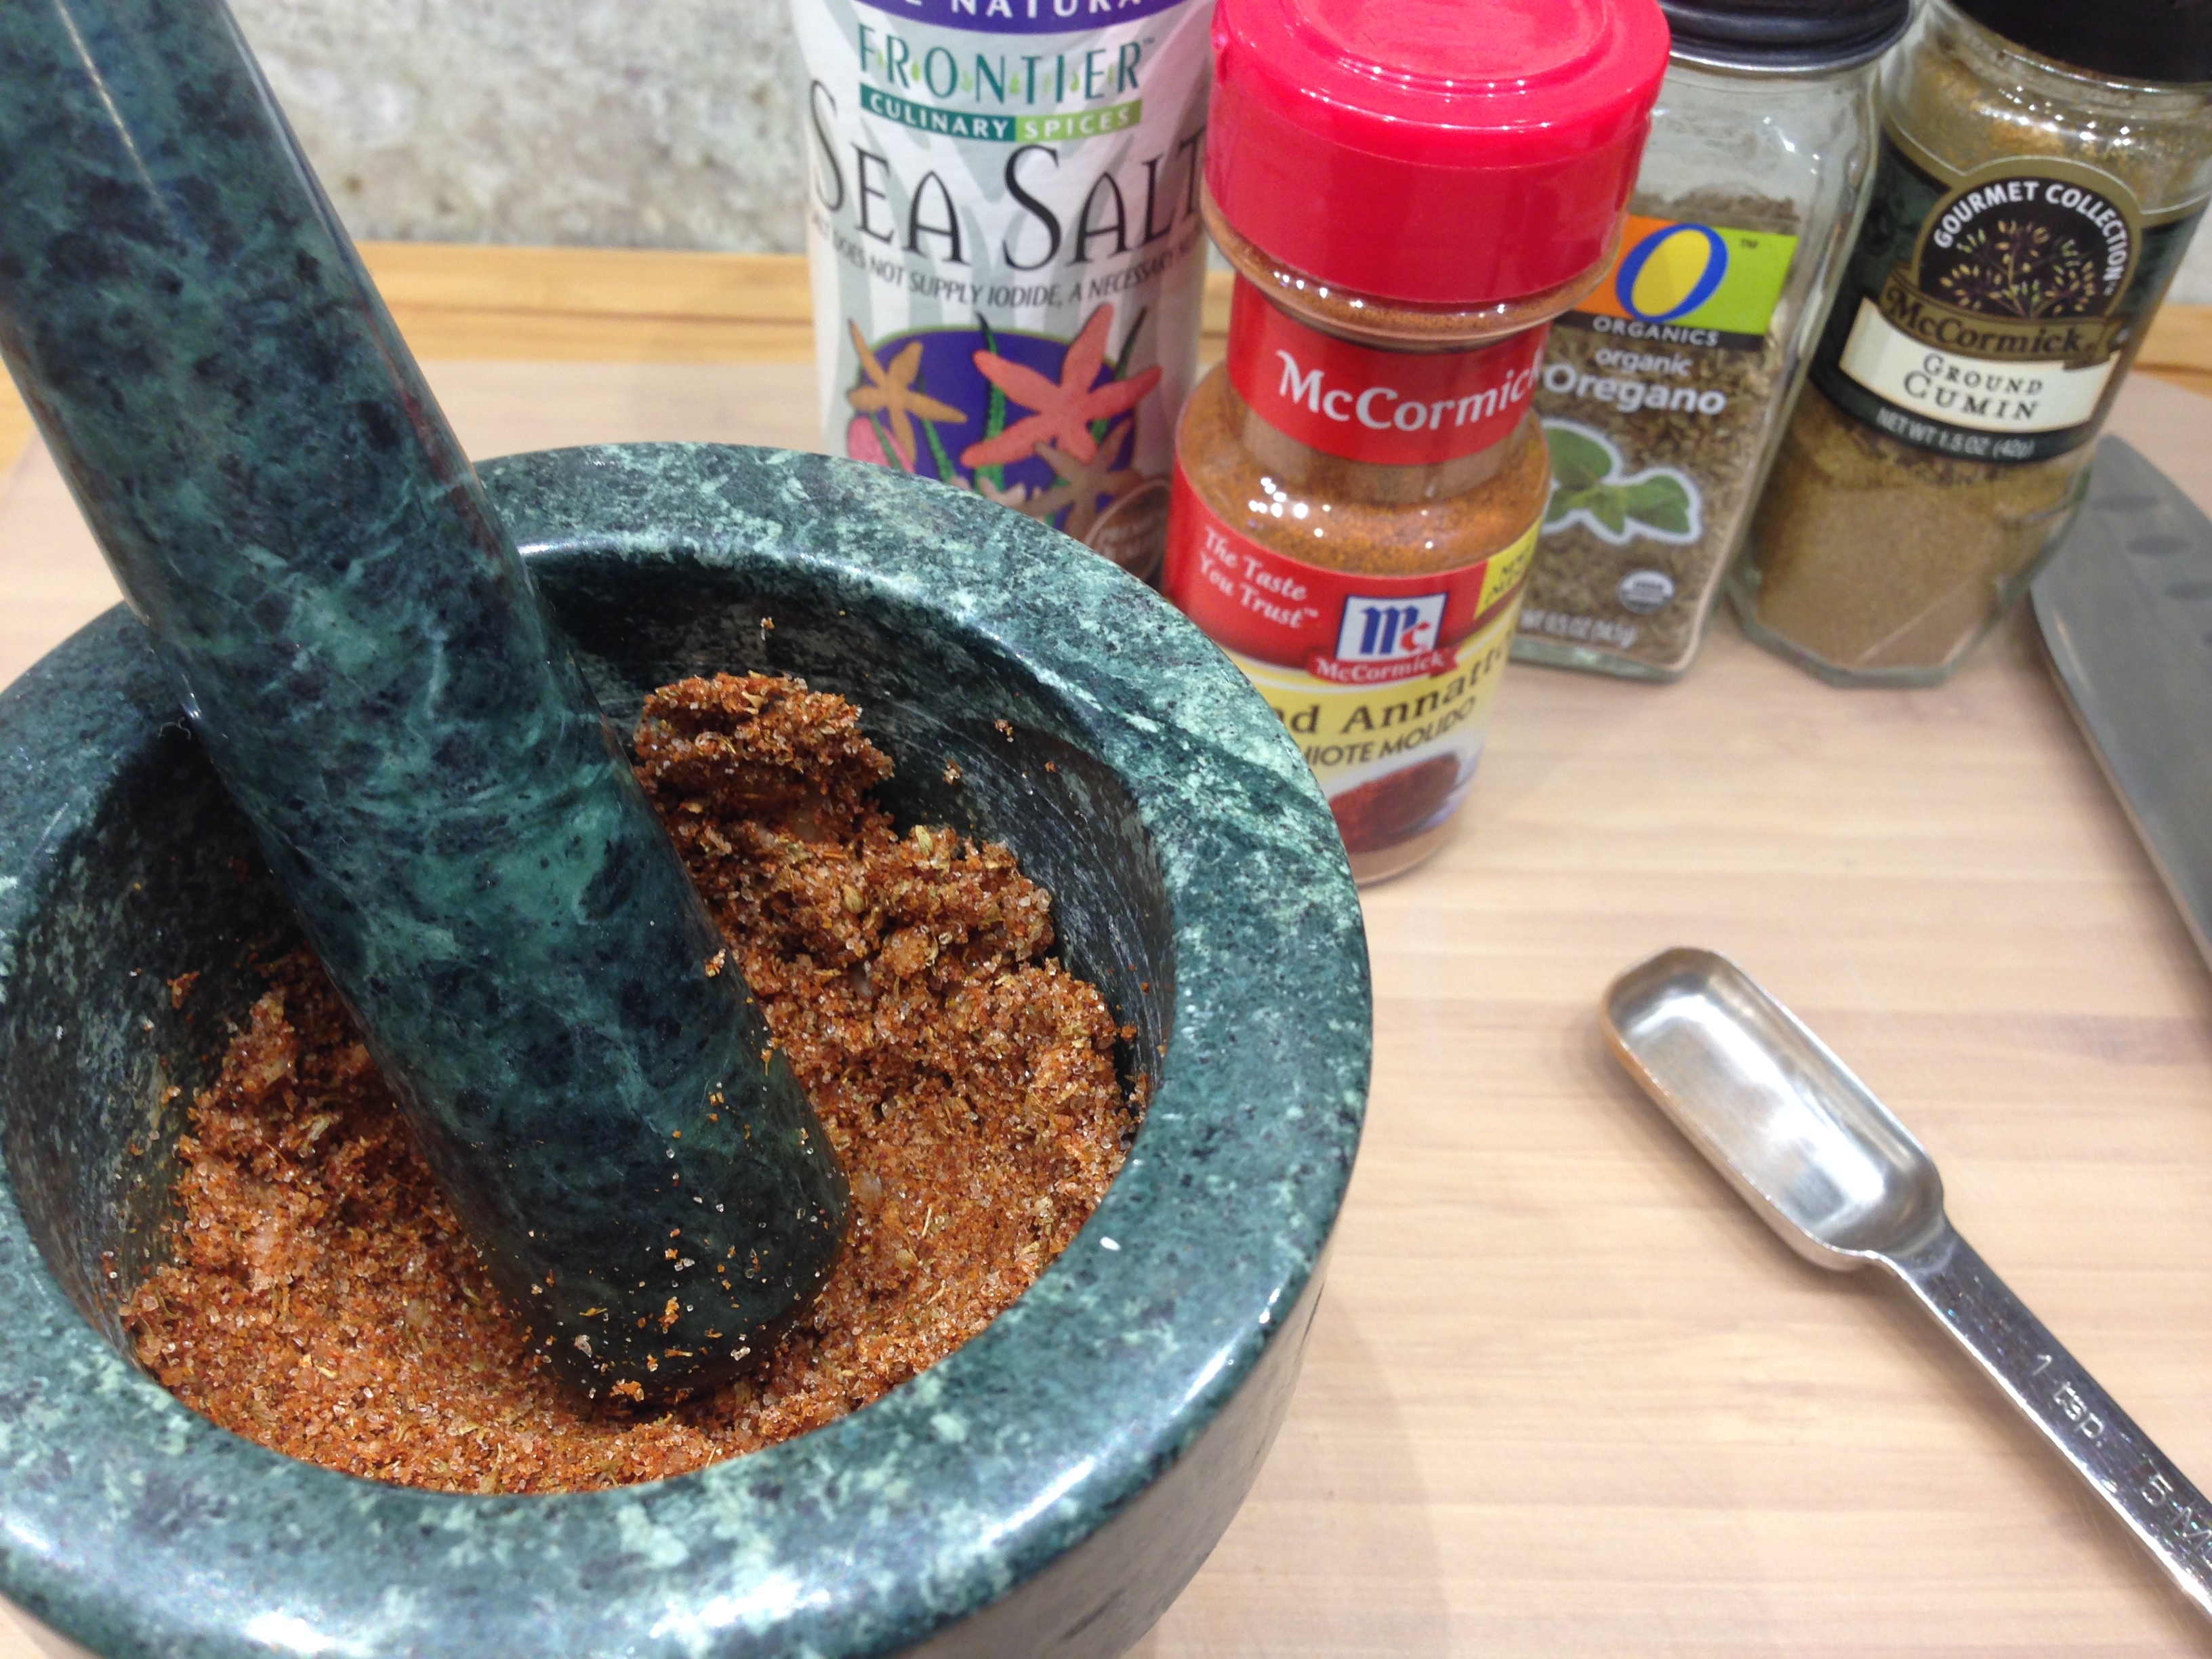 Ground with Mortar and Pestle